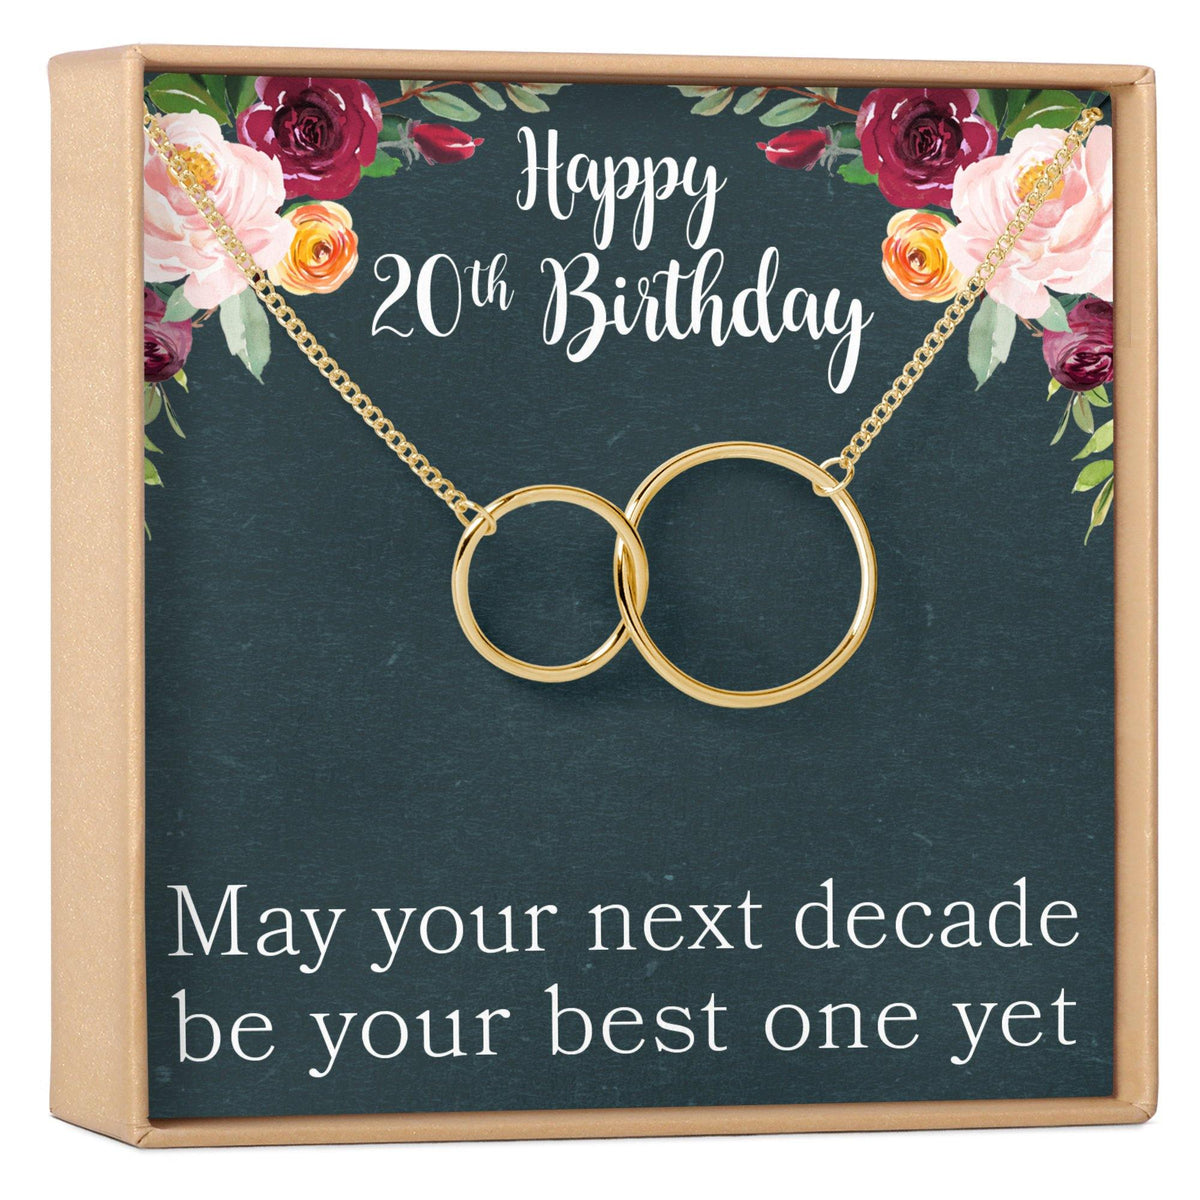 20th Birthday Necklace - Dear Ava, Jewelry / Necklaces / Pendants